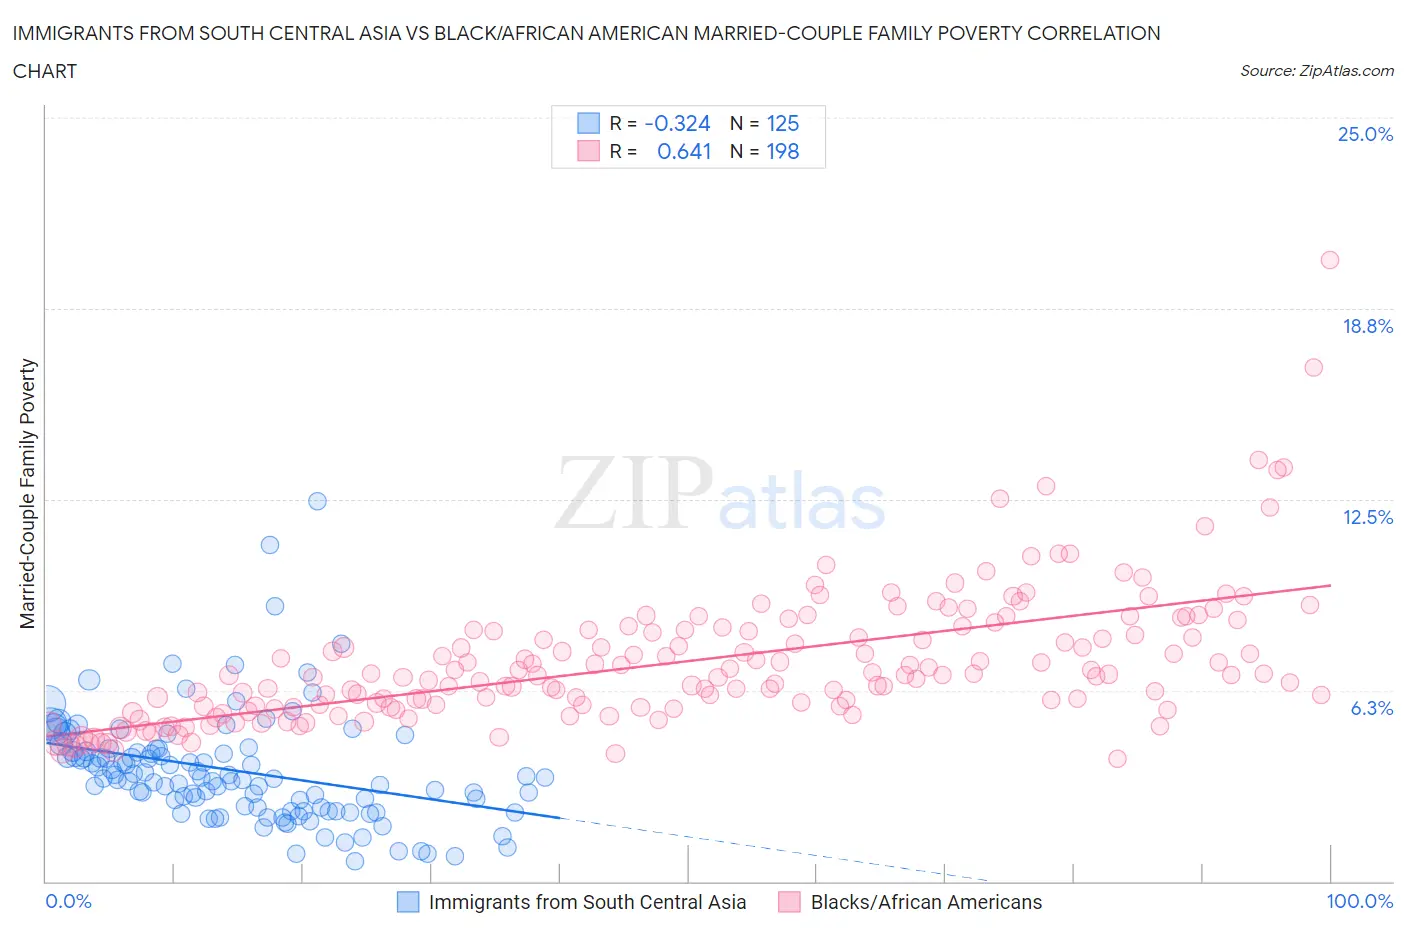 Immigrants from South Central Asia vs Black/African American Married-Couple Family Poverty